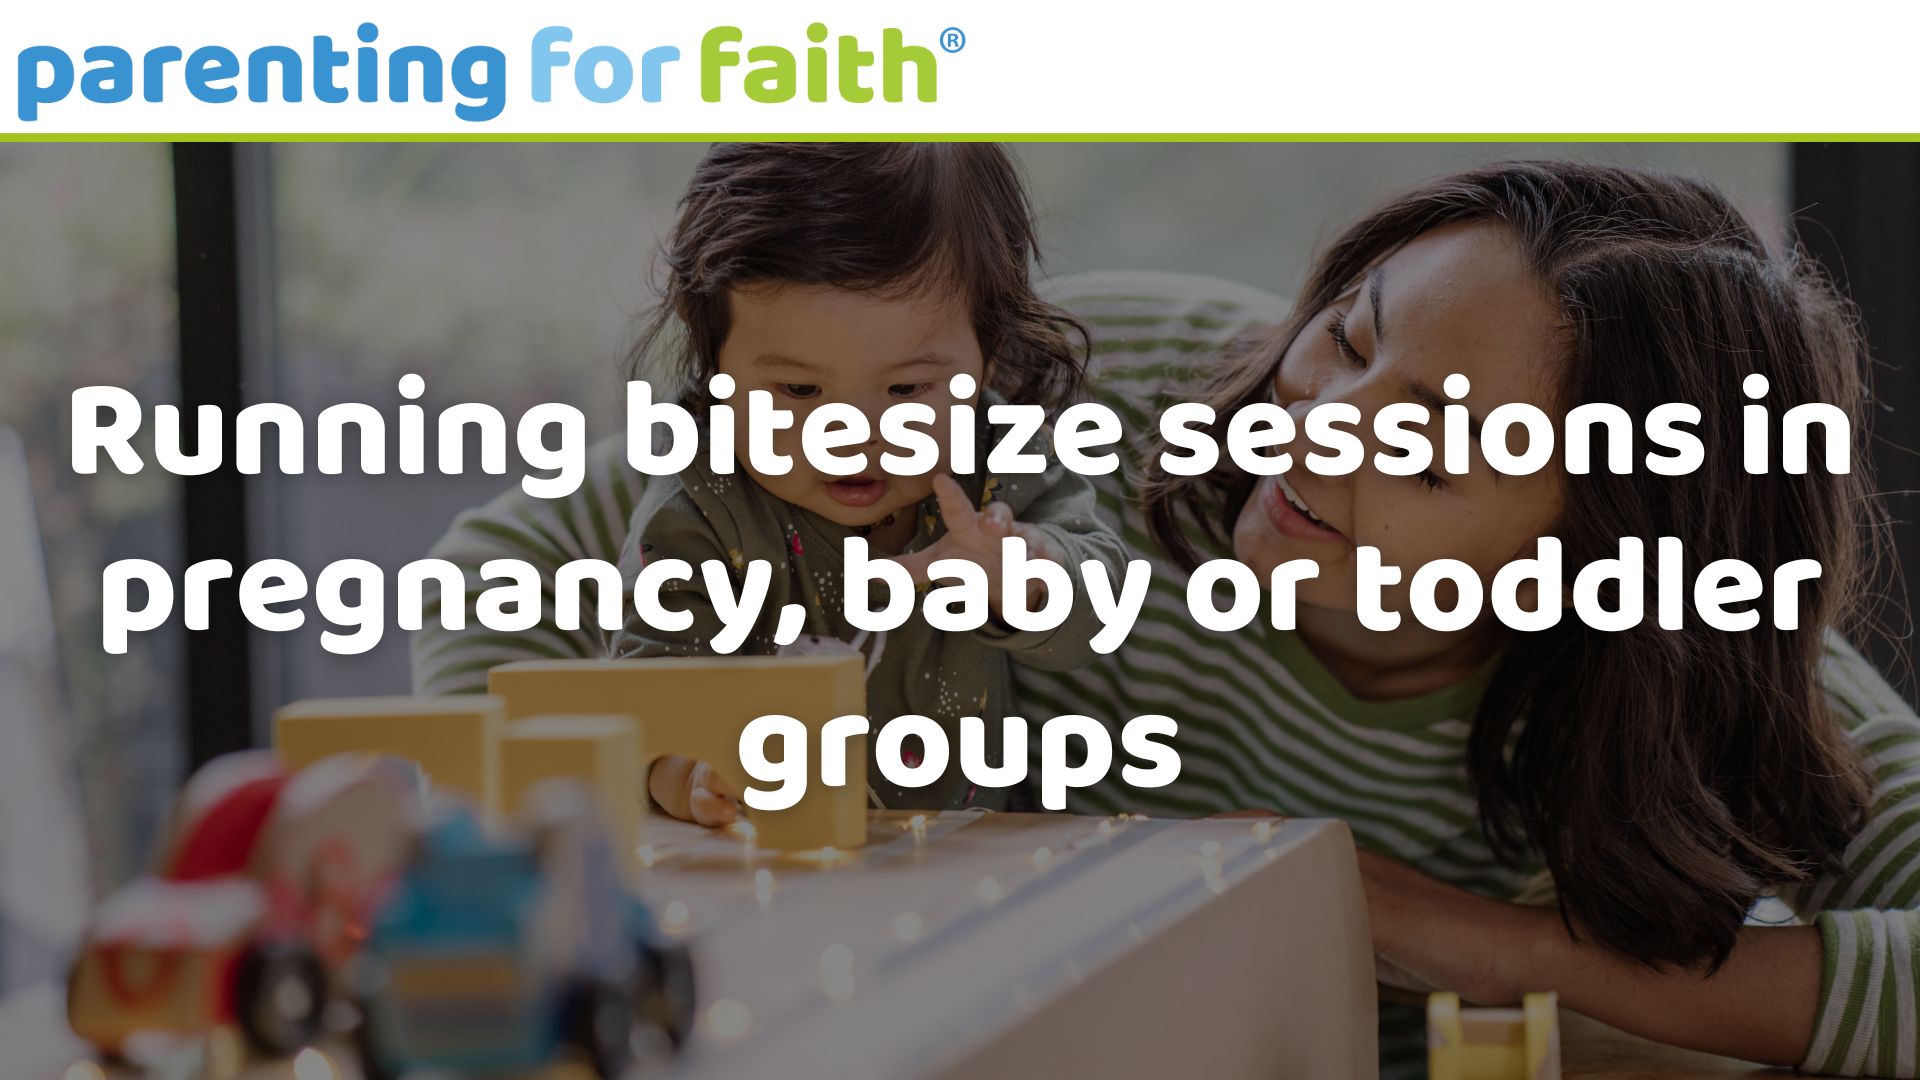 Running bitesize sessions in pregnancy baby or toddler groups Image credit kate sept from Getty Images Signature